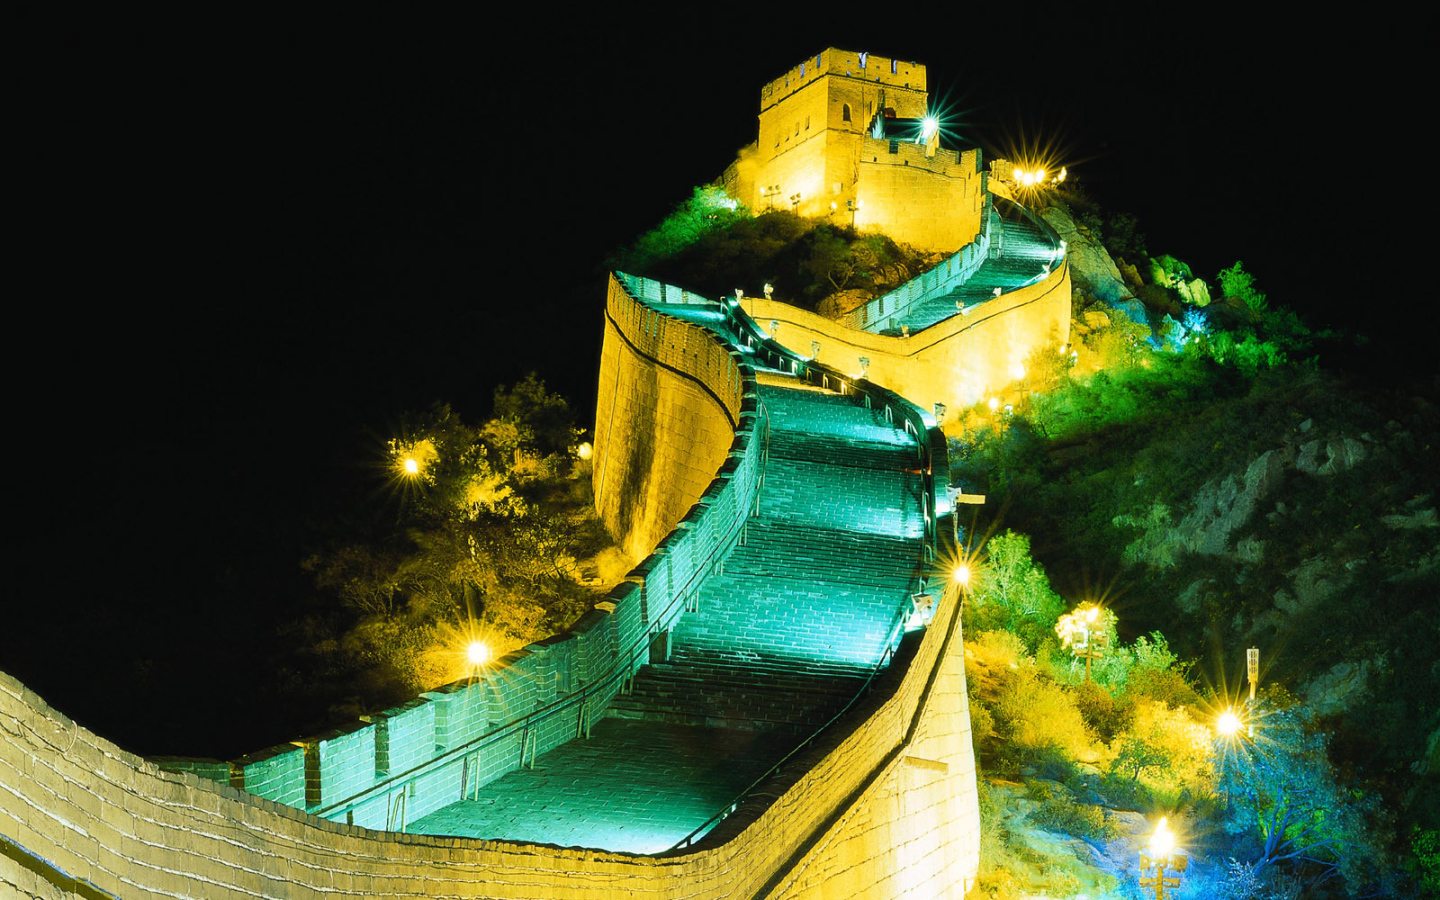 Great wall by night